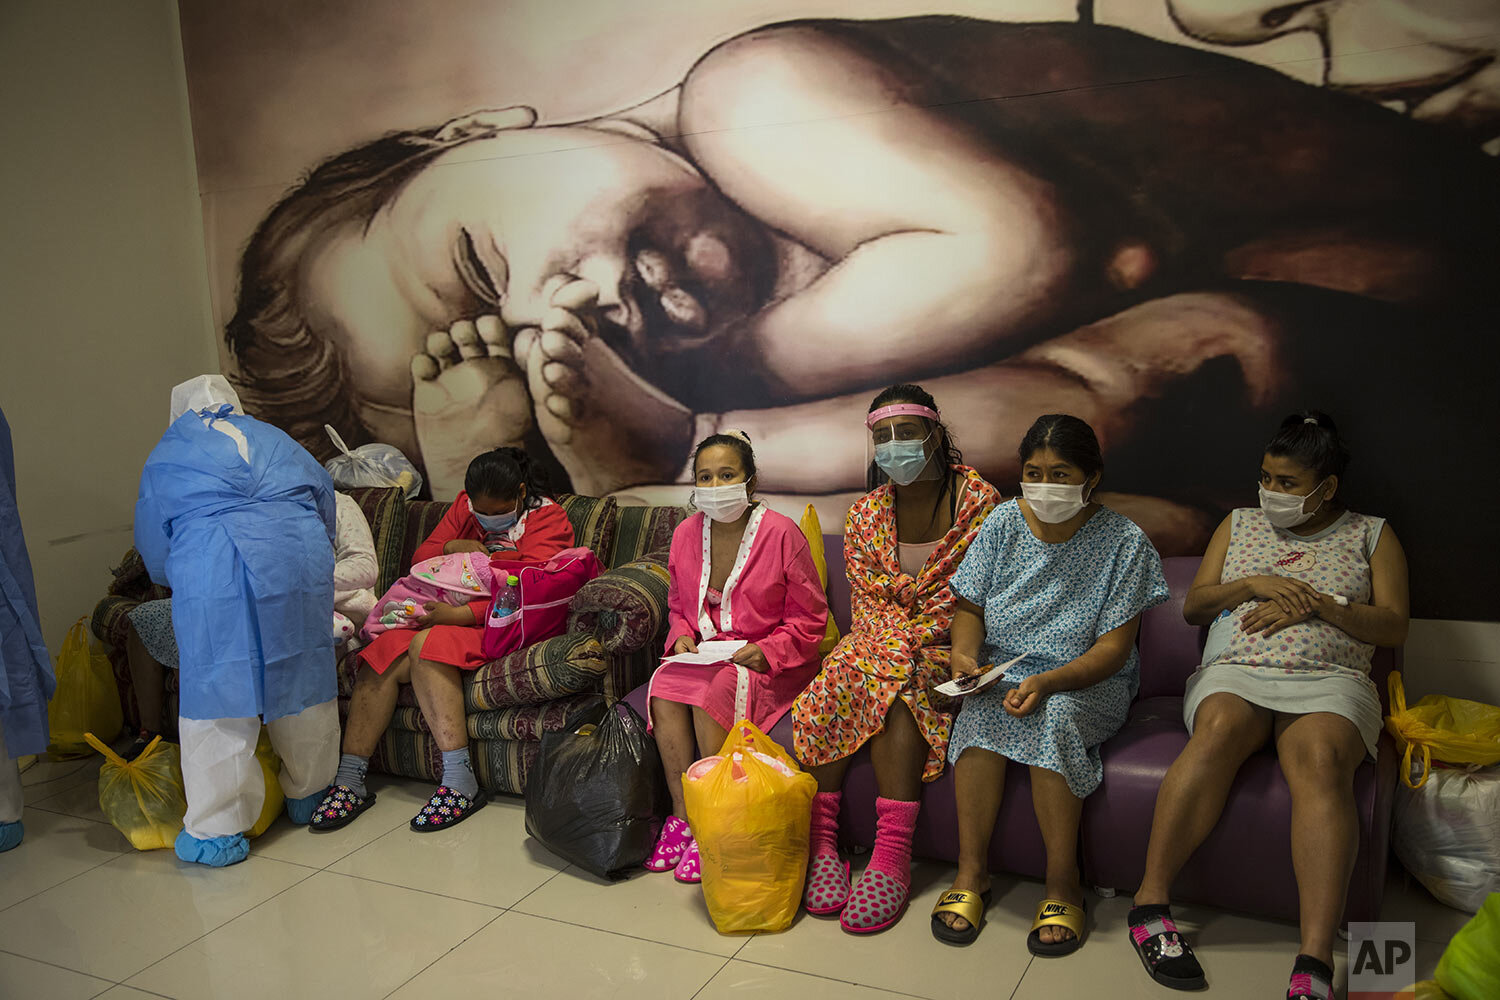  Maria Alvarez, center, sits with other mothers who are infected with the new coronavirus, as they wait to be handed their babies before being discharged at the National Perinatal and Maternal Institute in Lima, Peru, Thursday, July 30, 2020. (AP Pho